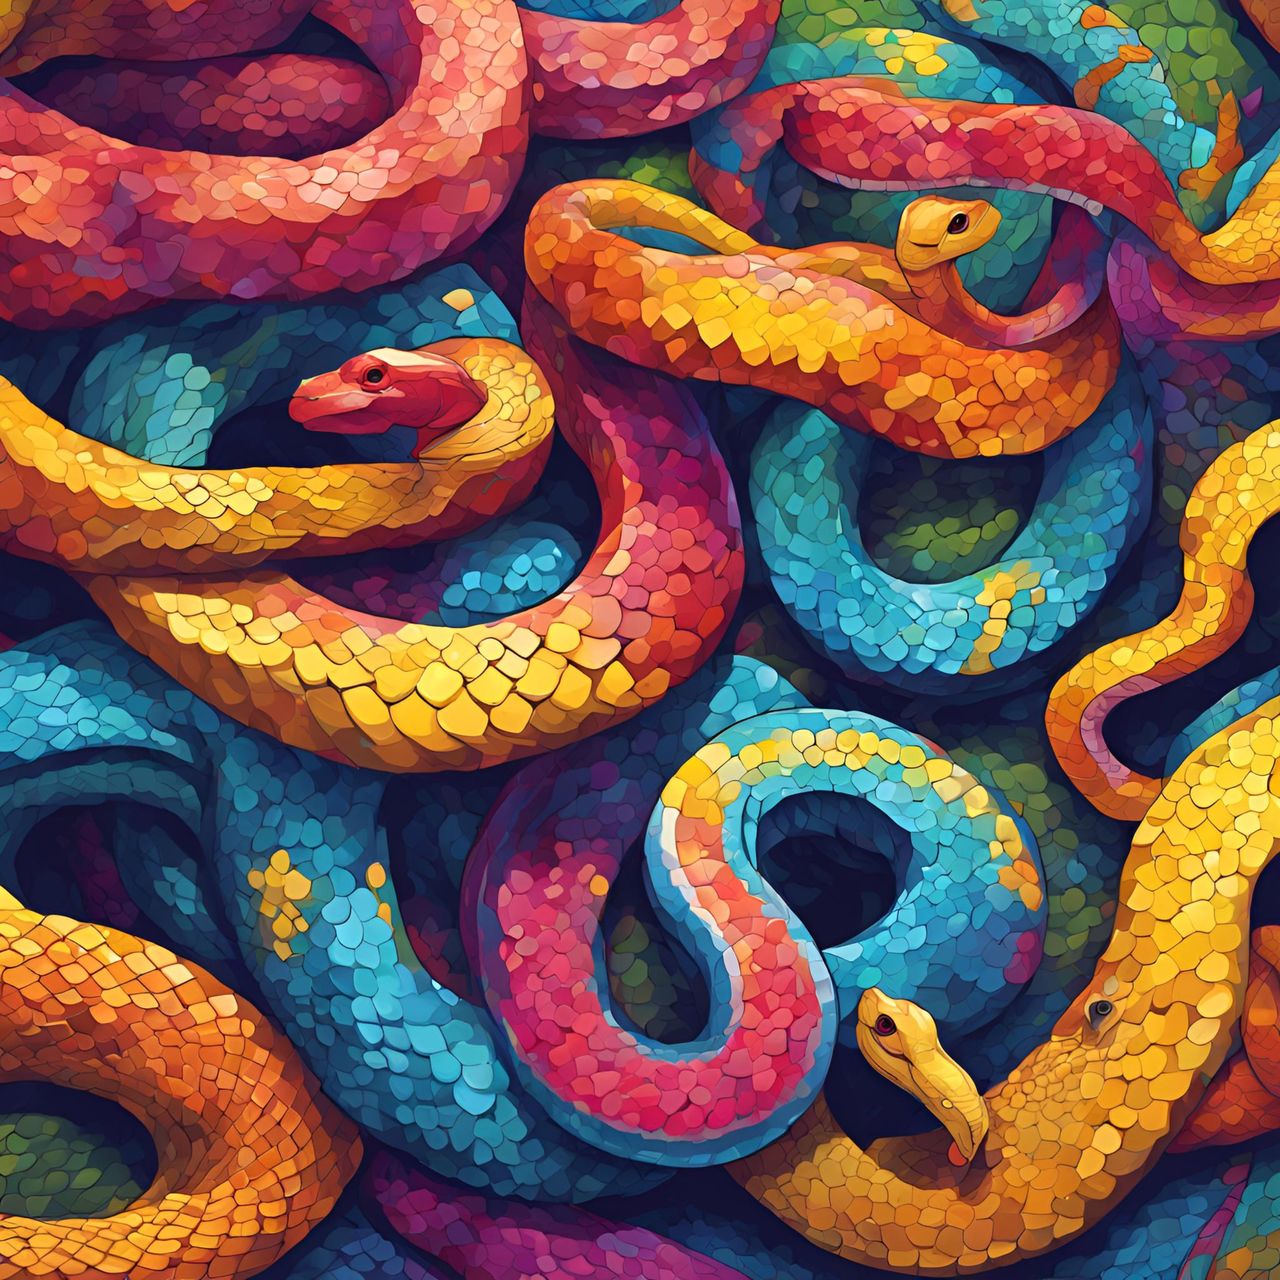 serpent, multi colored, snake, full frame, no people, backgrounds, reptile, art, close-up, pattern